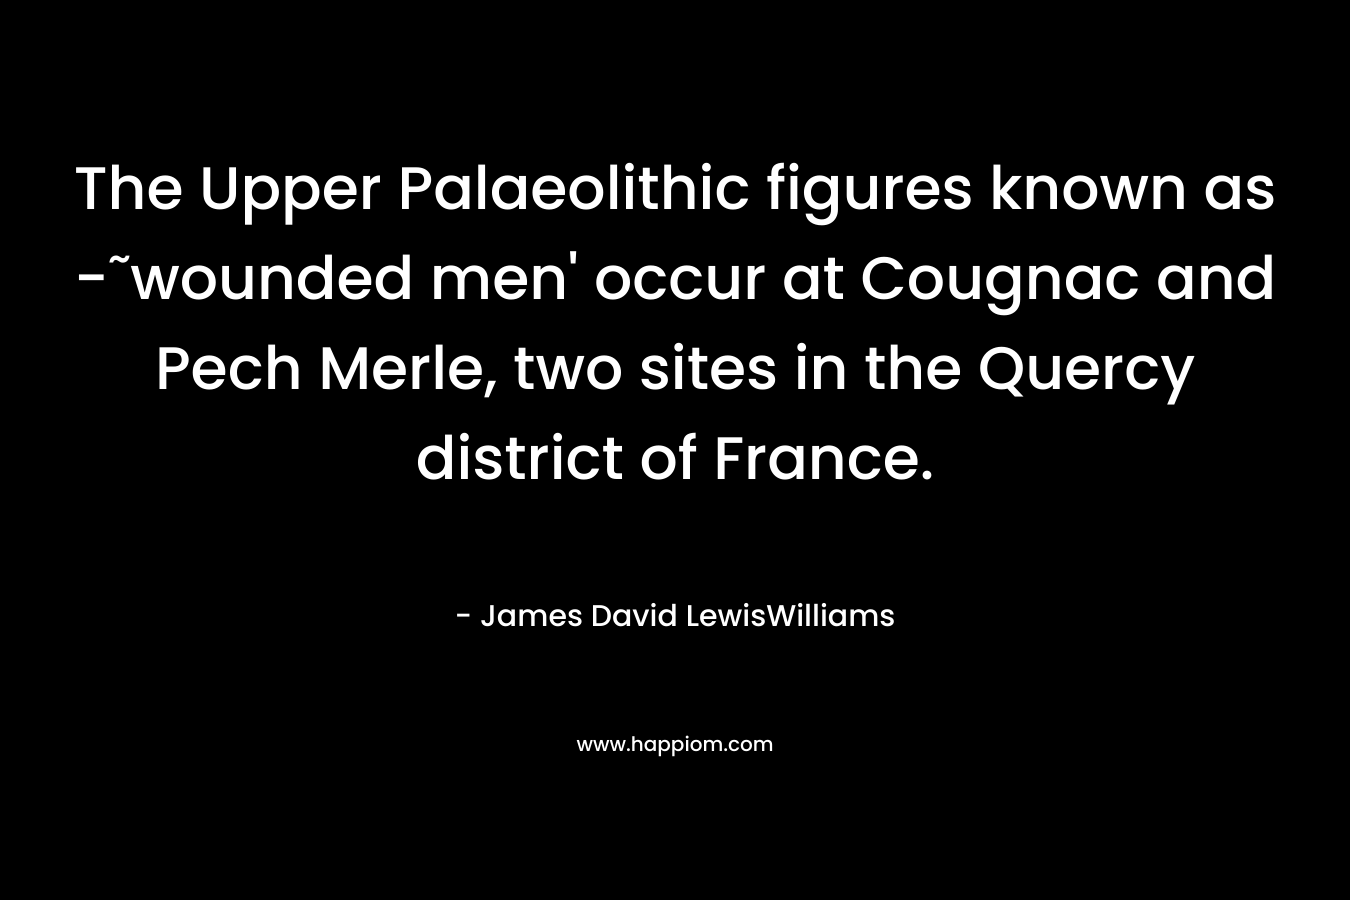 The Upper Palaeolithic figures known as -˜wounded men' occur at Cougnac and Pech Merle, two sites in the Quercy district of France.